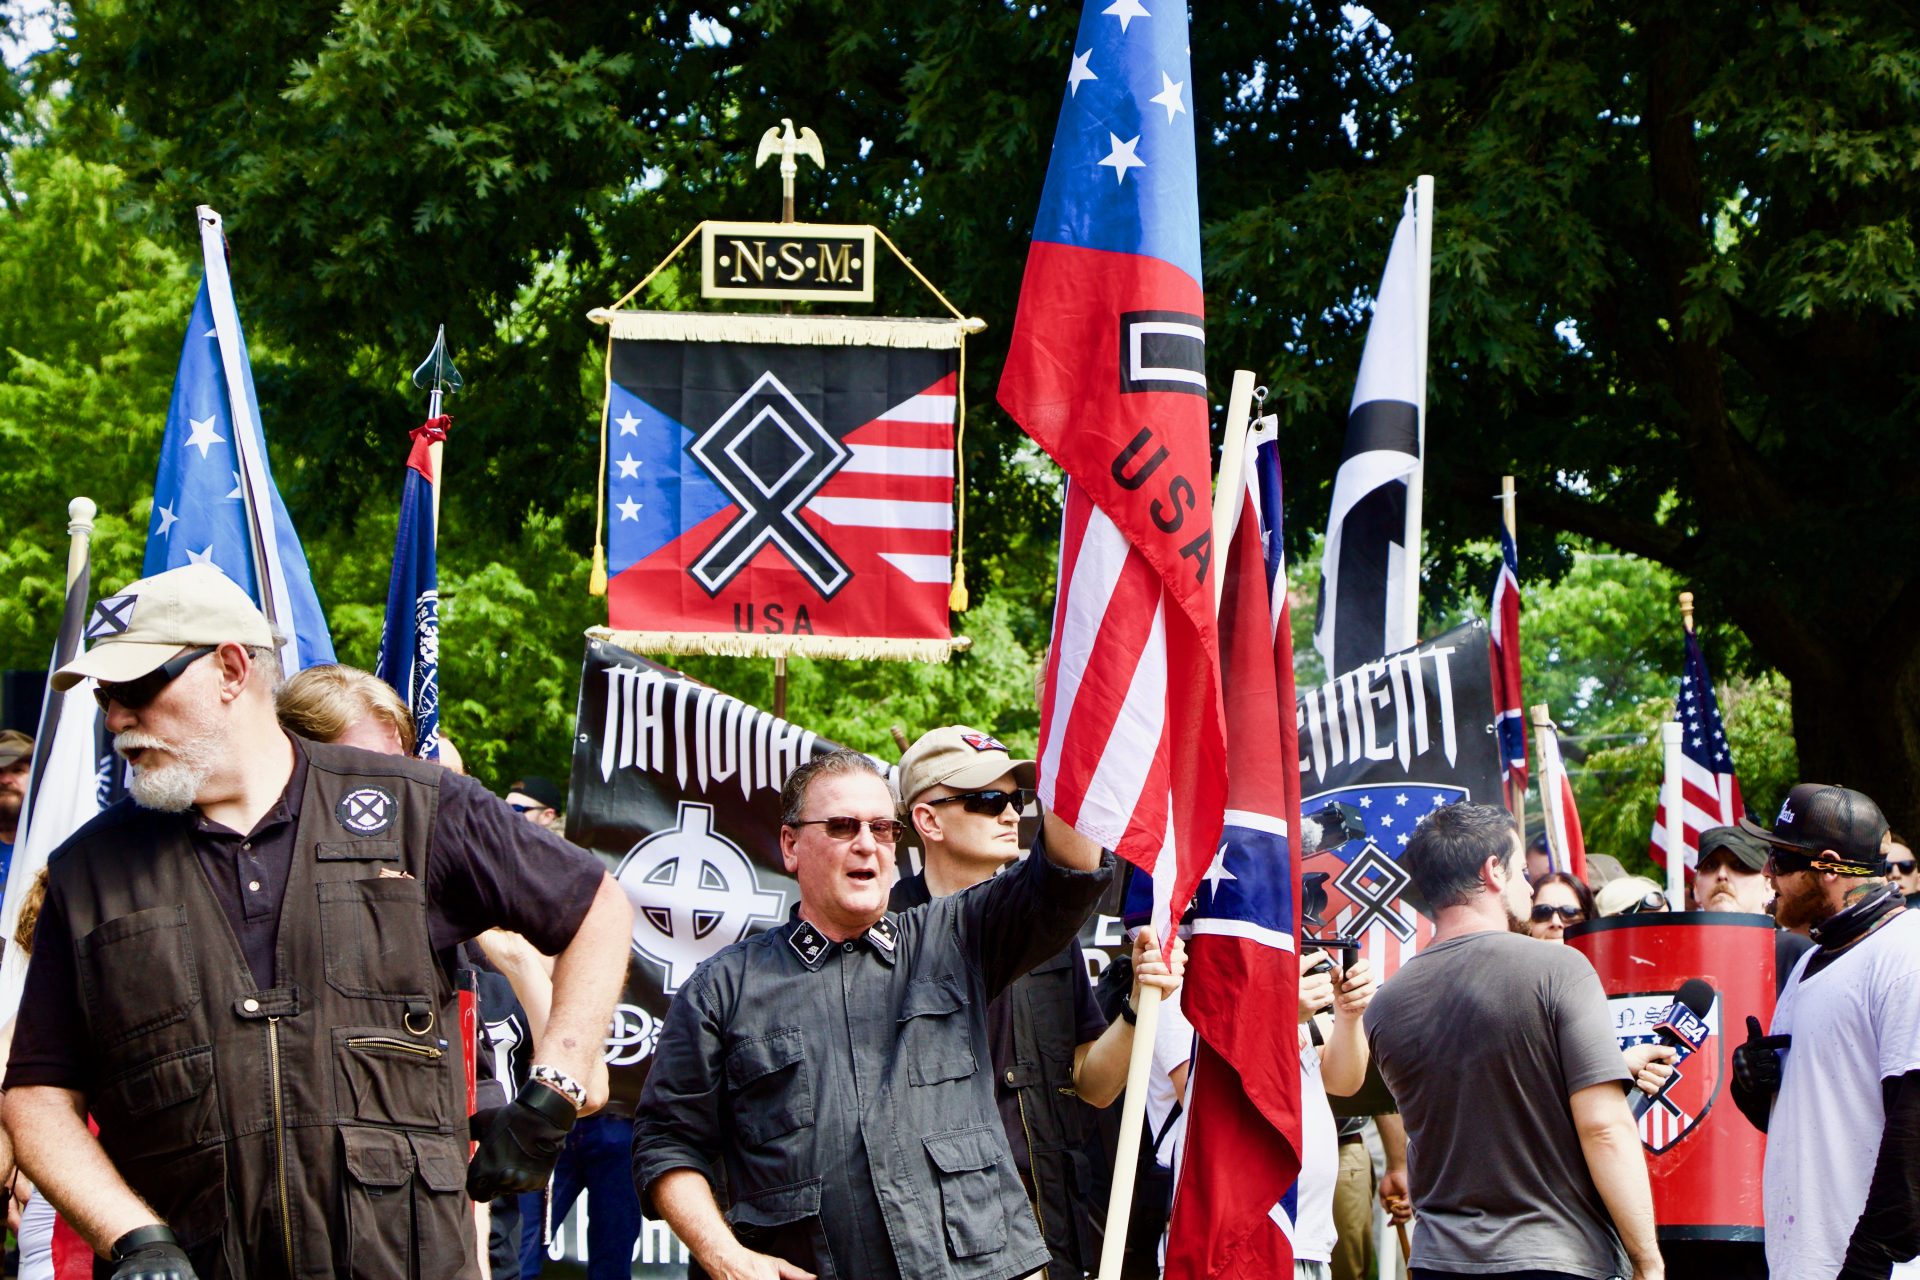 FBI Claims White Nationalists are Just as Dangerous as Islamic Terrorists after Charlottesville